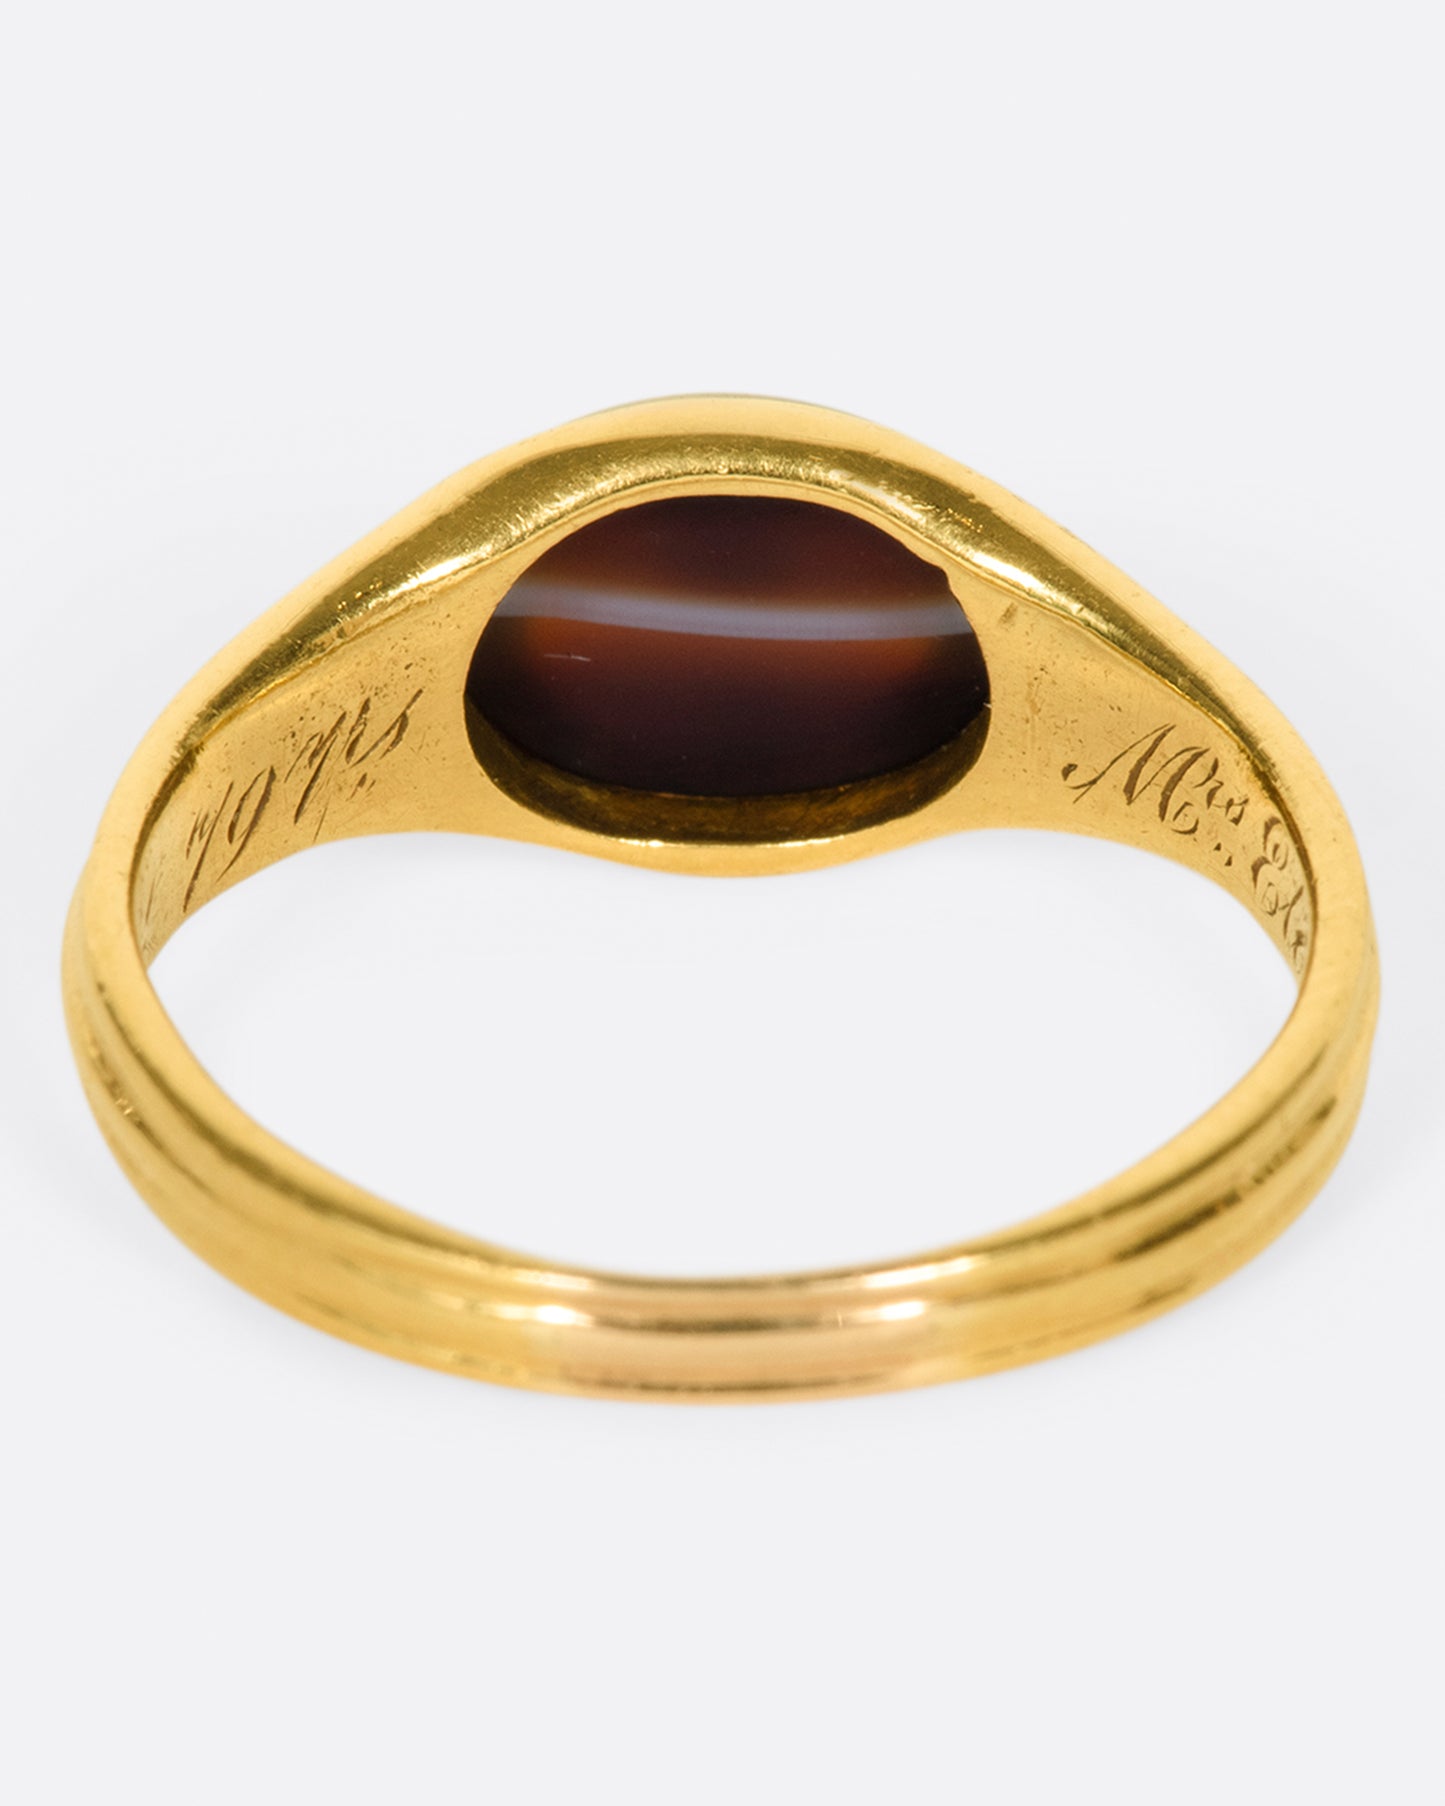 A vintage gold signet ring with a banded deep red oval agate at its center.